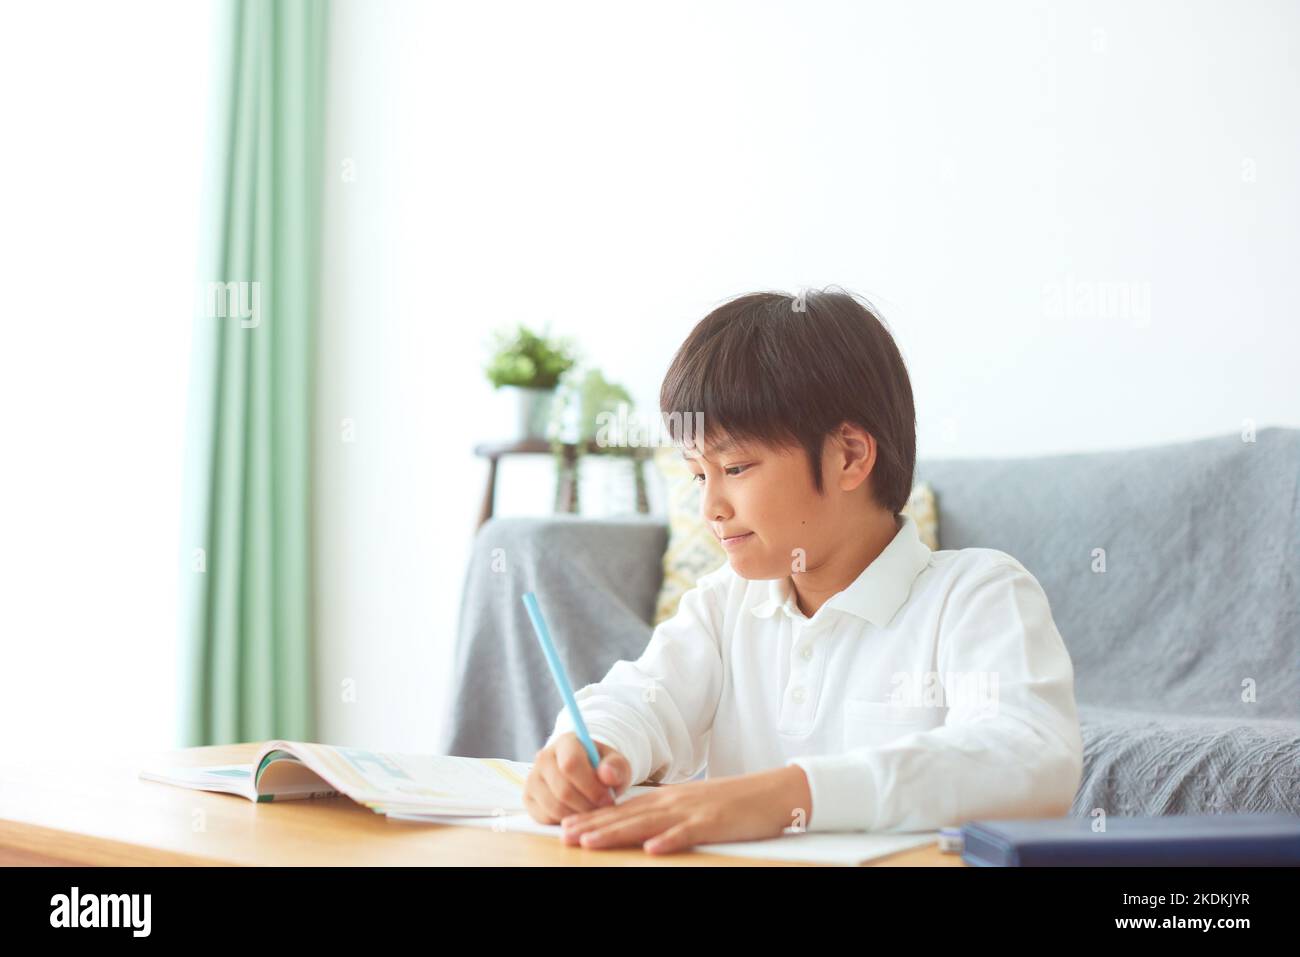 Japanese kid studying at home Stock Photo